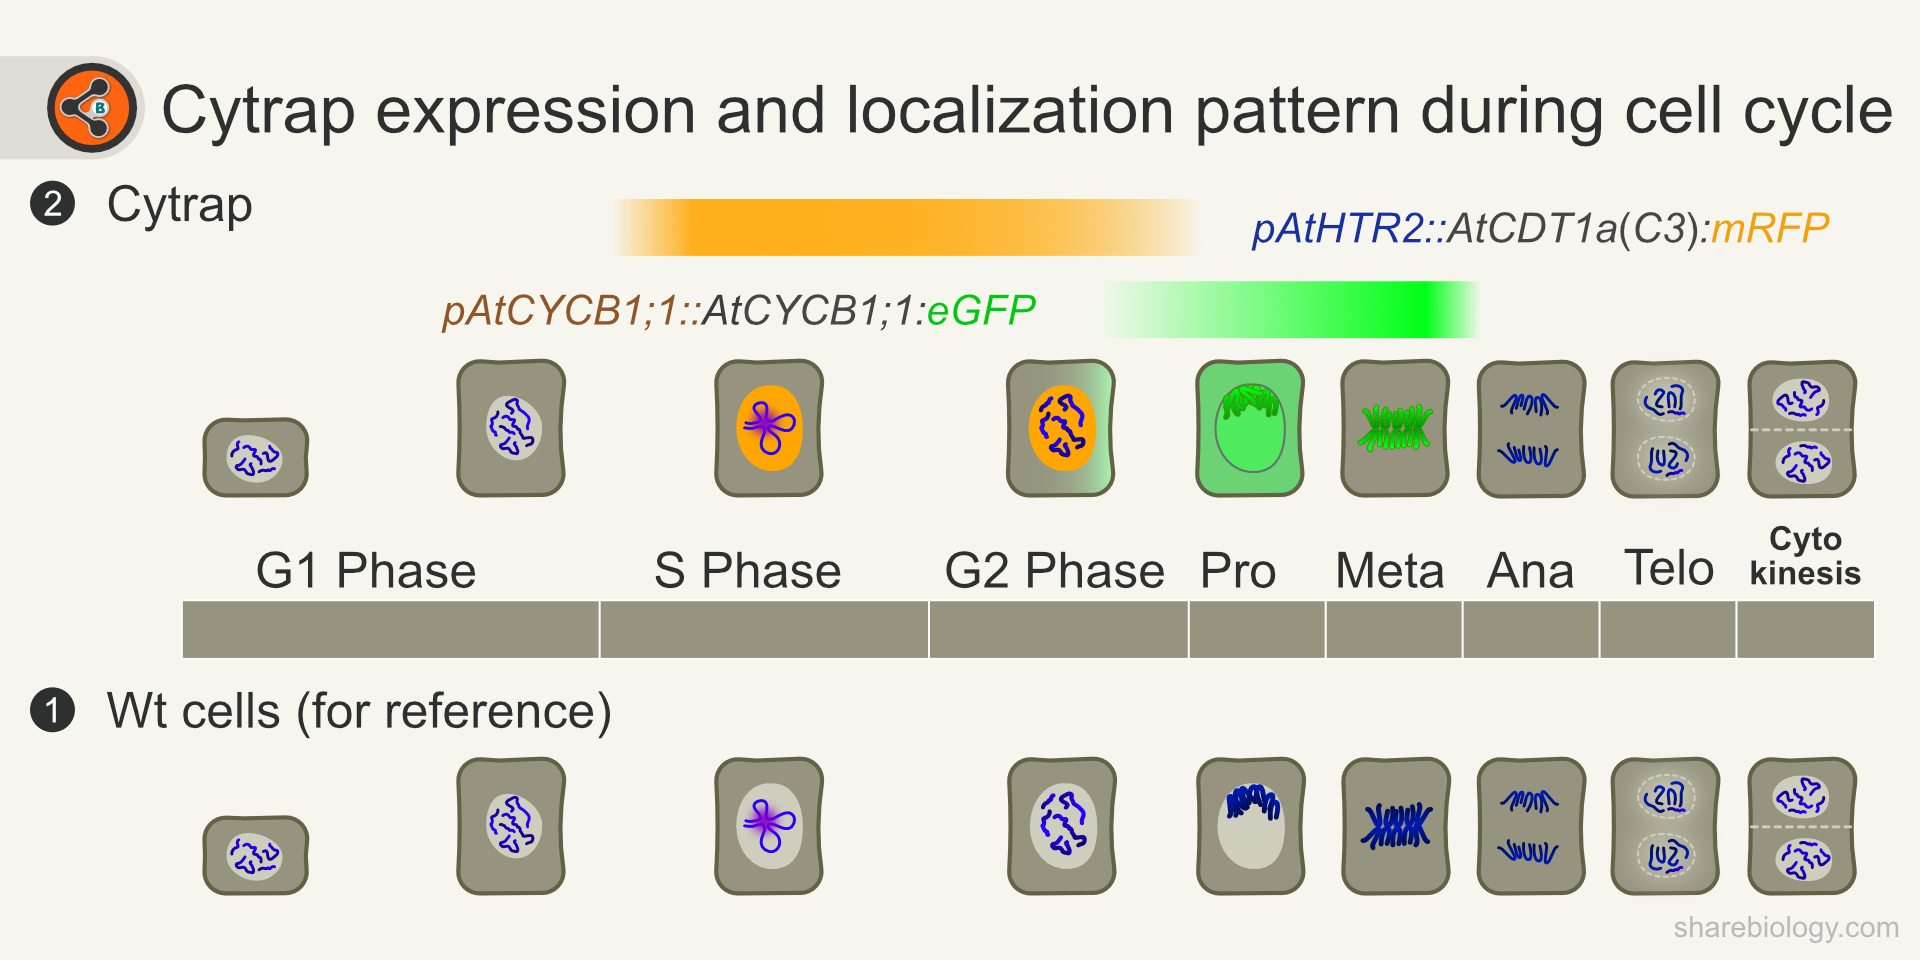 Figure 1. Illustration depicting cell cycle phases and Cytrap expression window and marker's localization